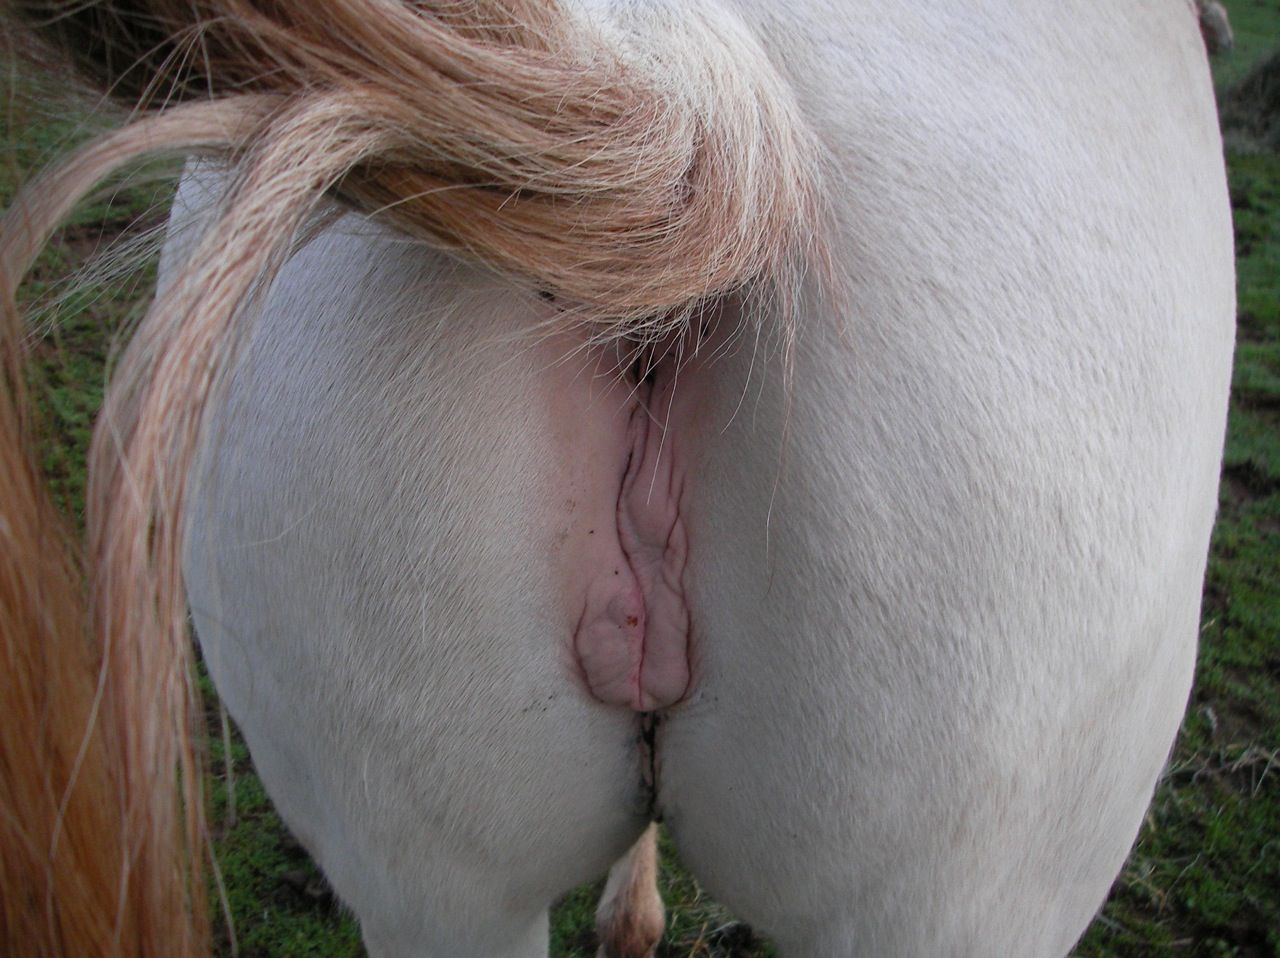 Goat sex pussy picture